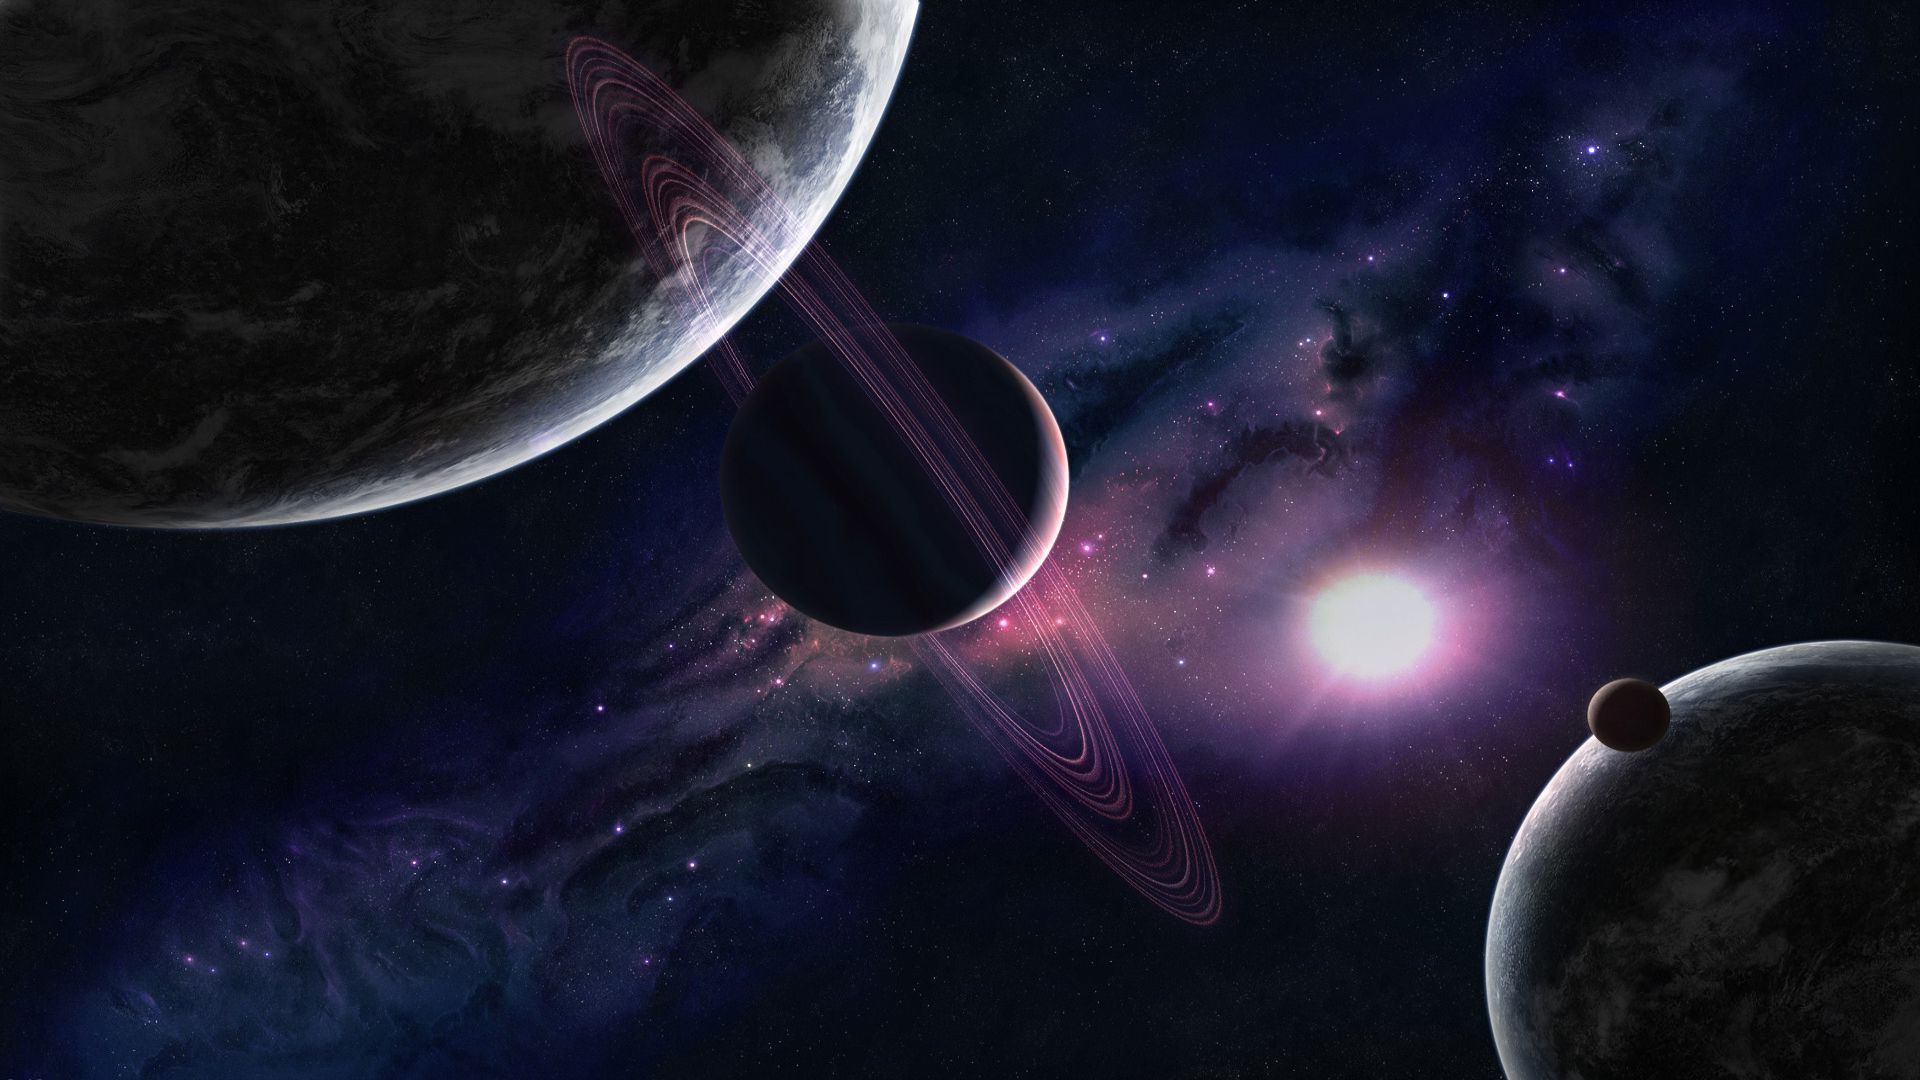 Space Solar System Wallpaper - Pics about space